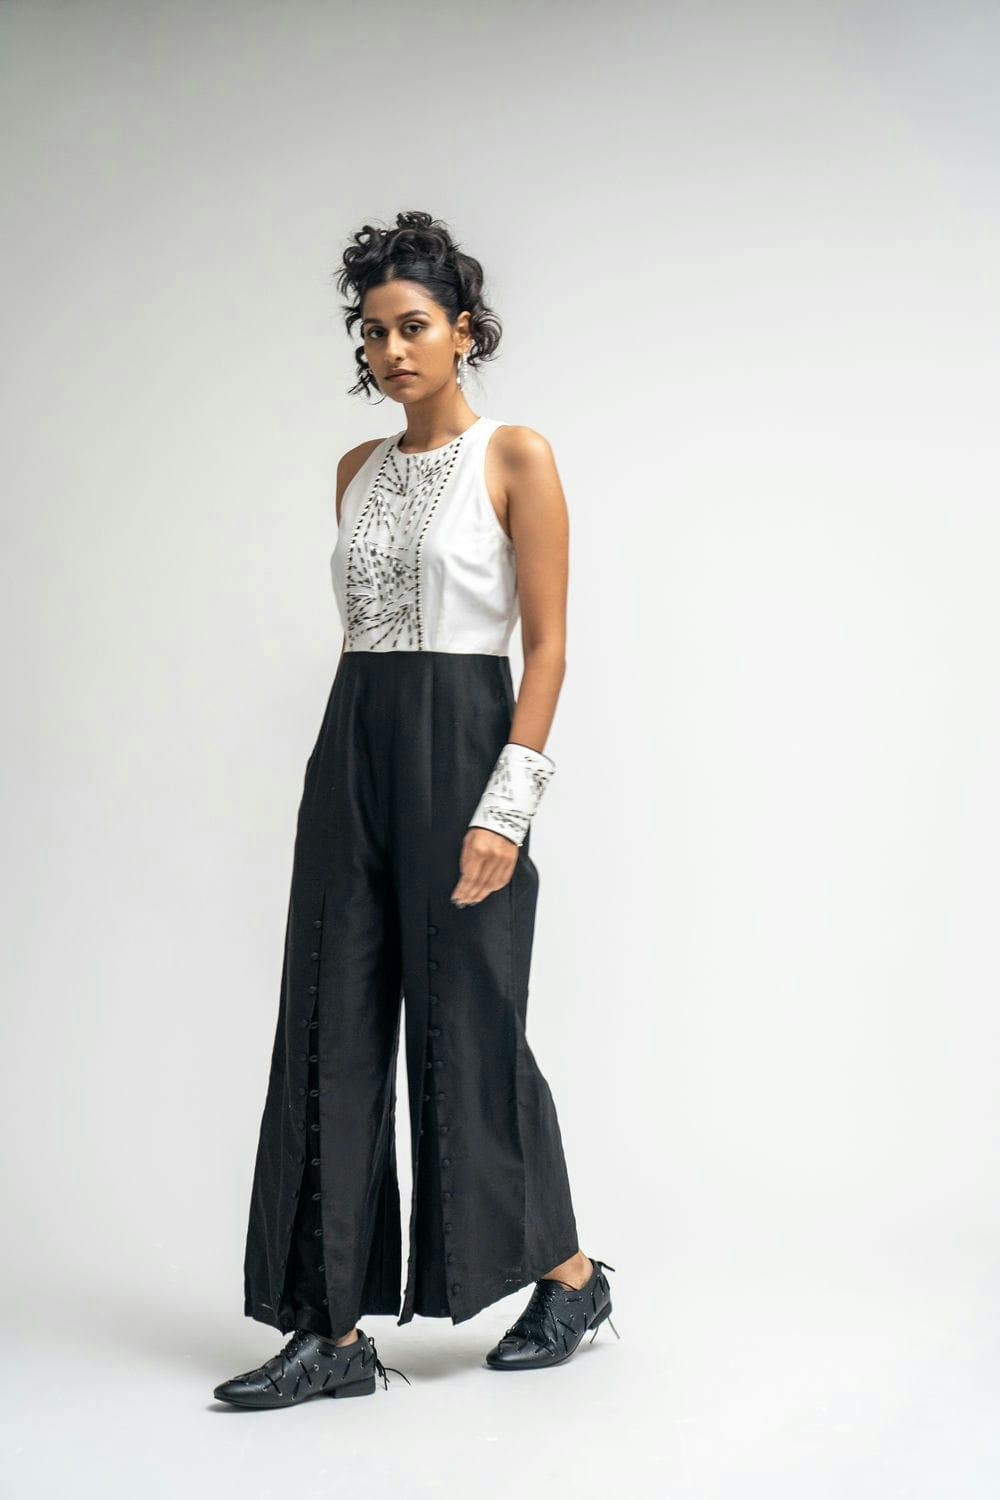 ATBW - Spiced Up Jumpsuit, a product by ATBW